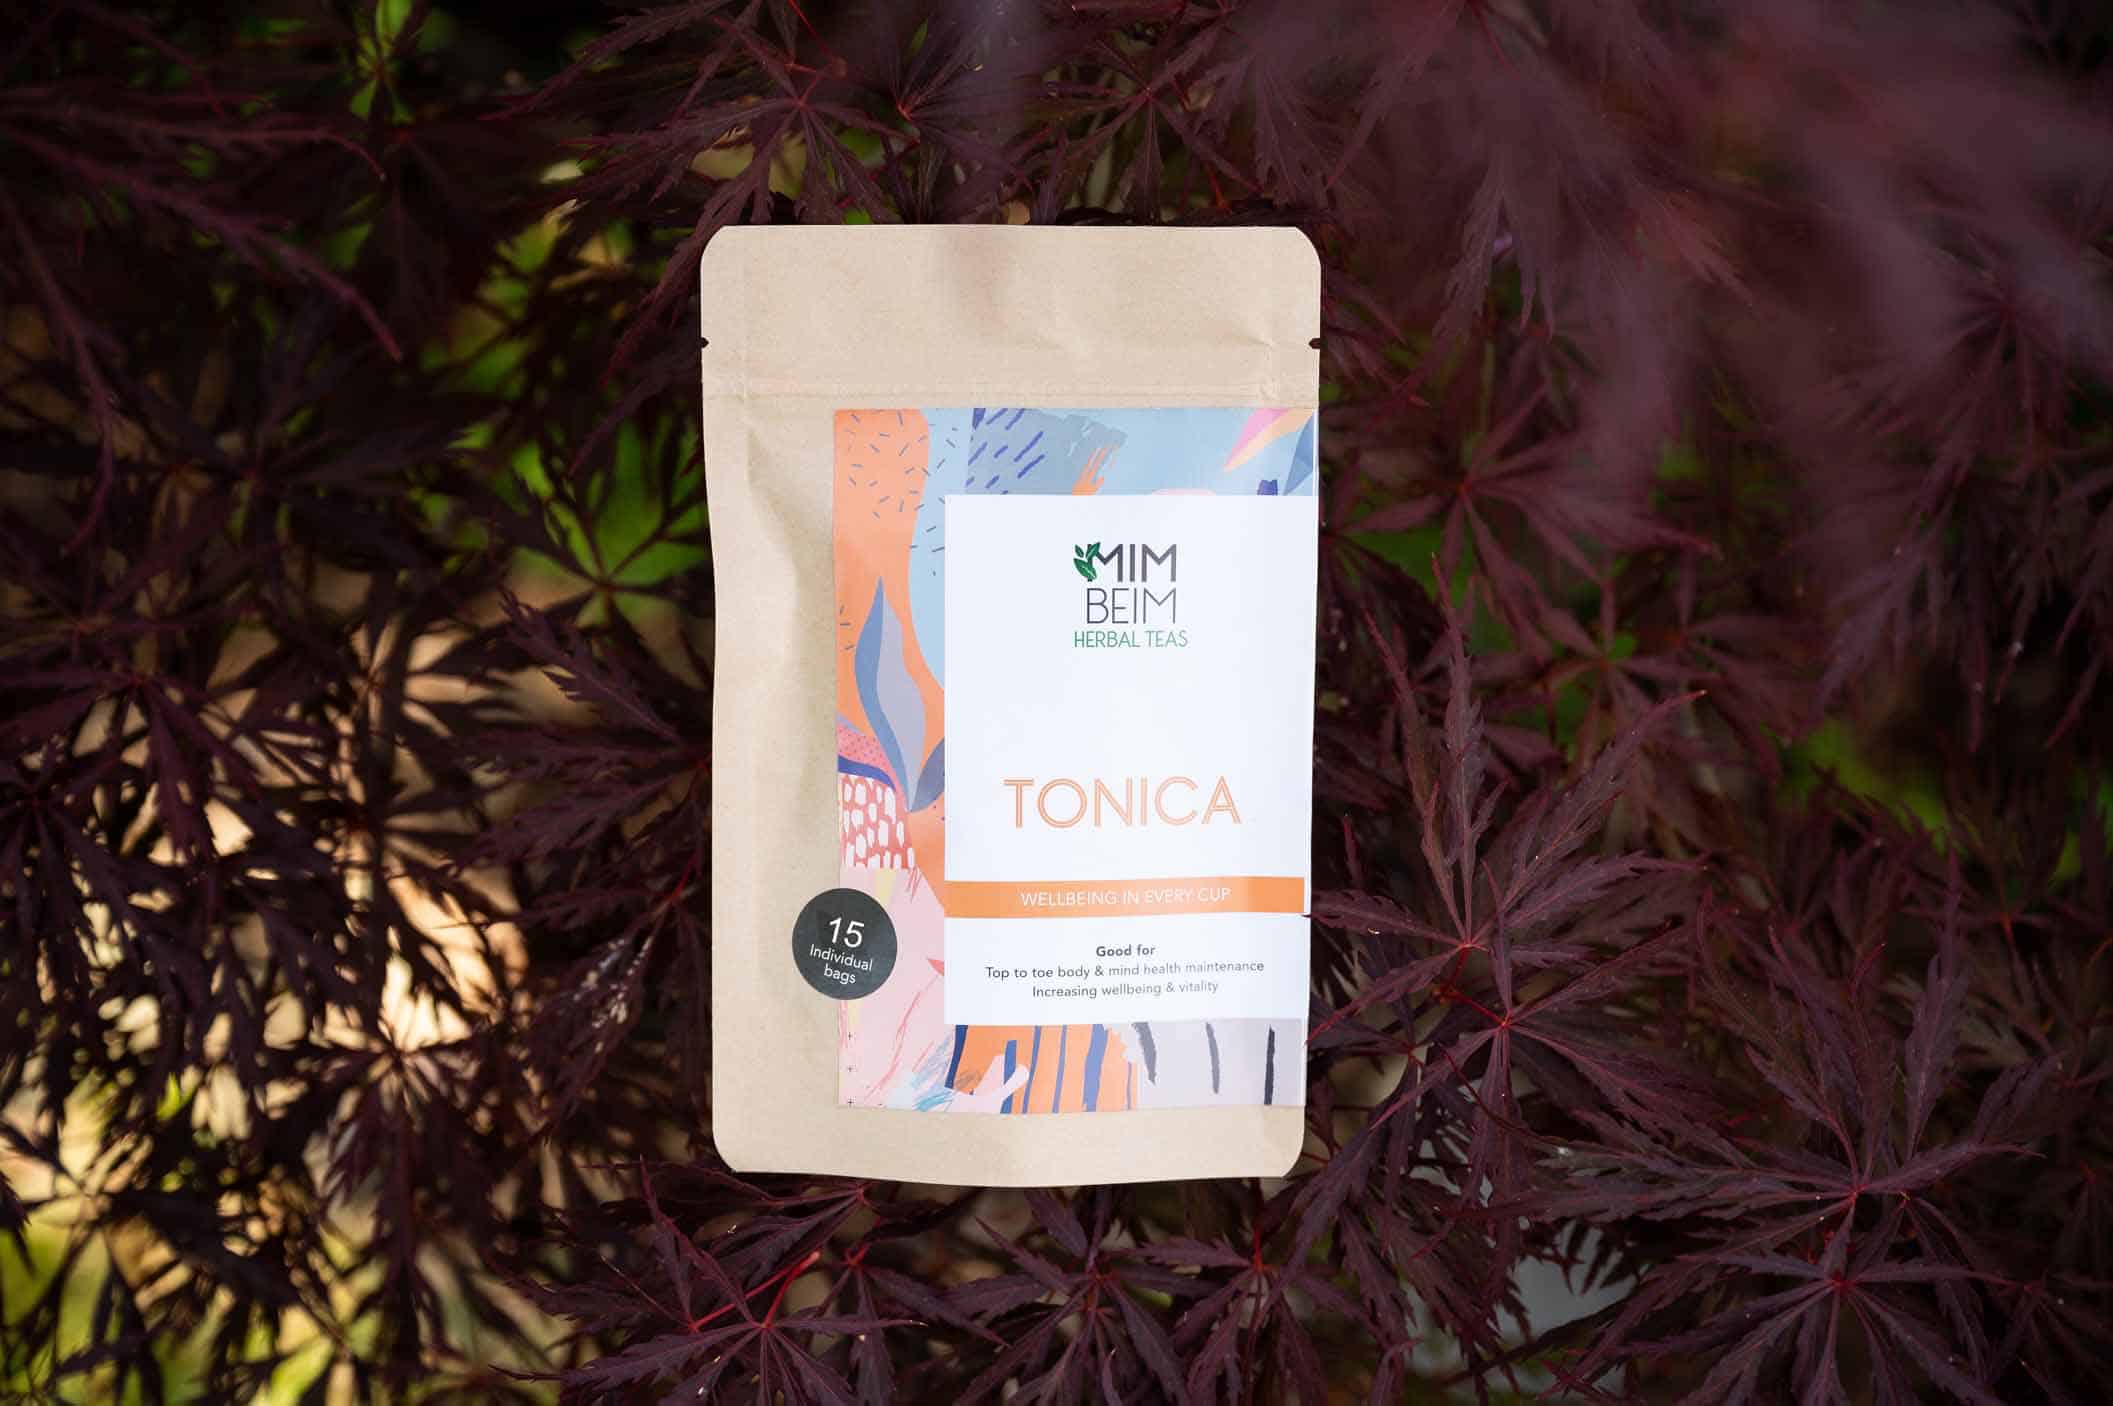 Tonic Herbal Tea - feel better and have more energy with each cup